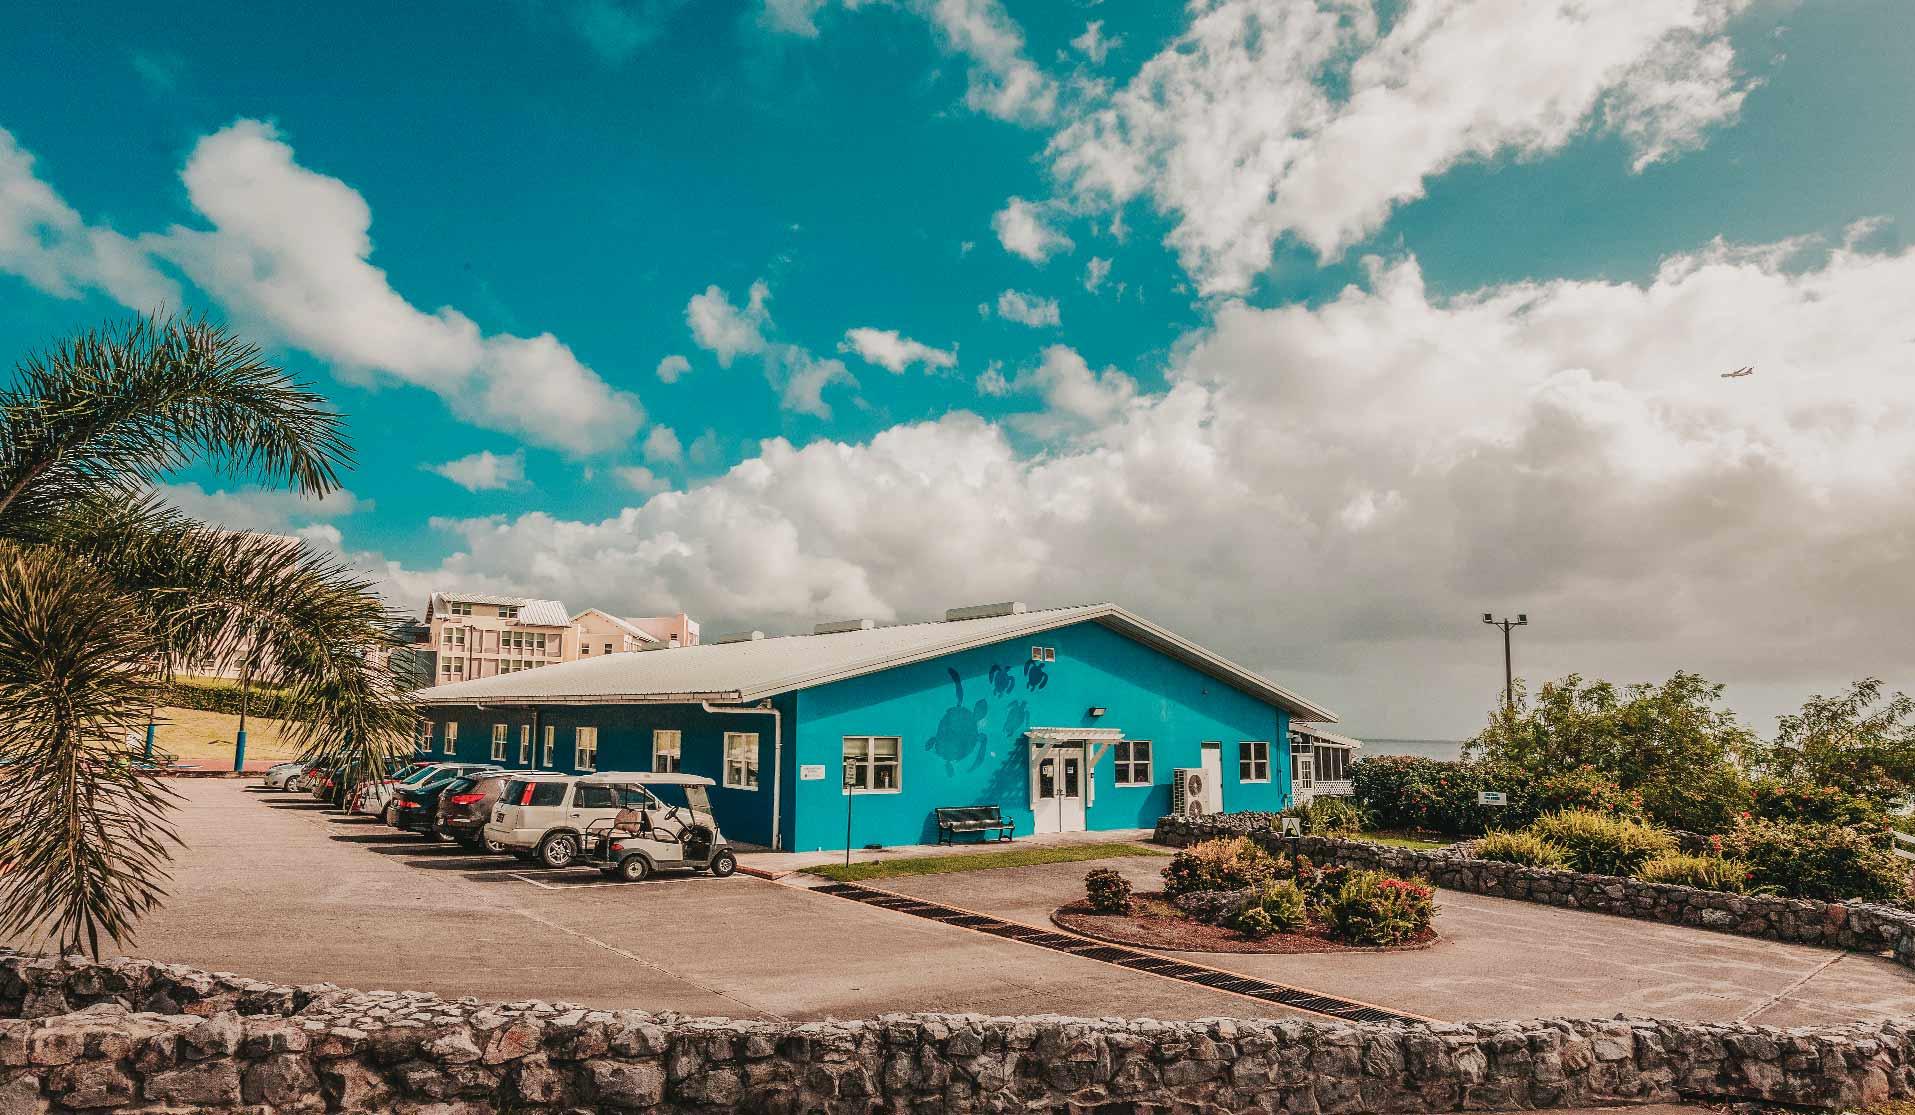 A blue Ross Vet building with cars parked in front